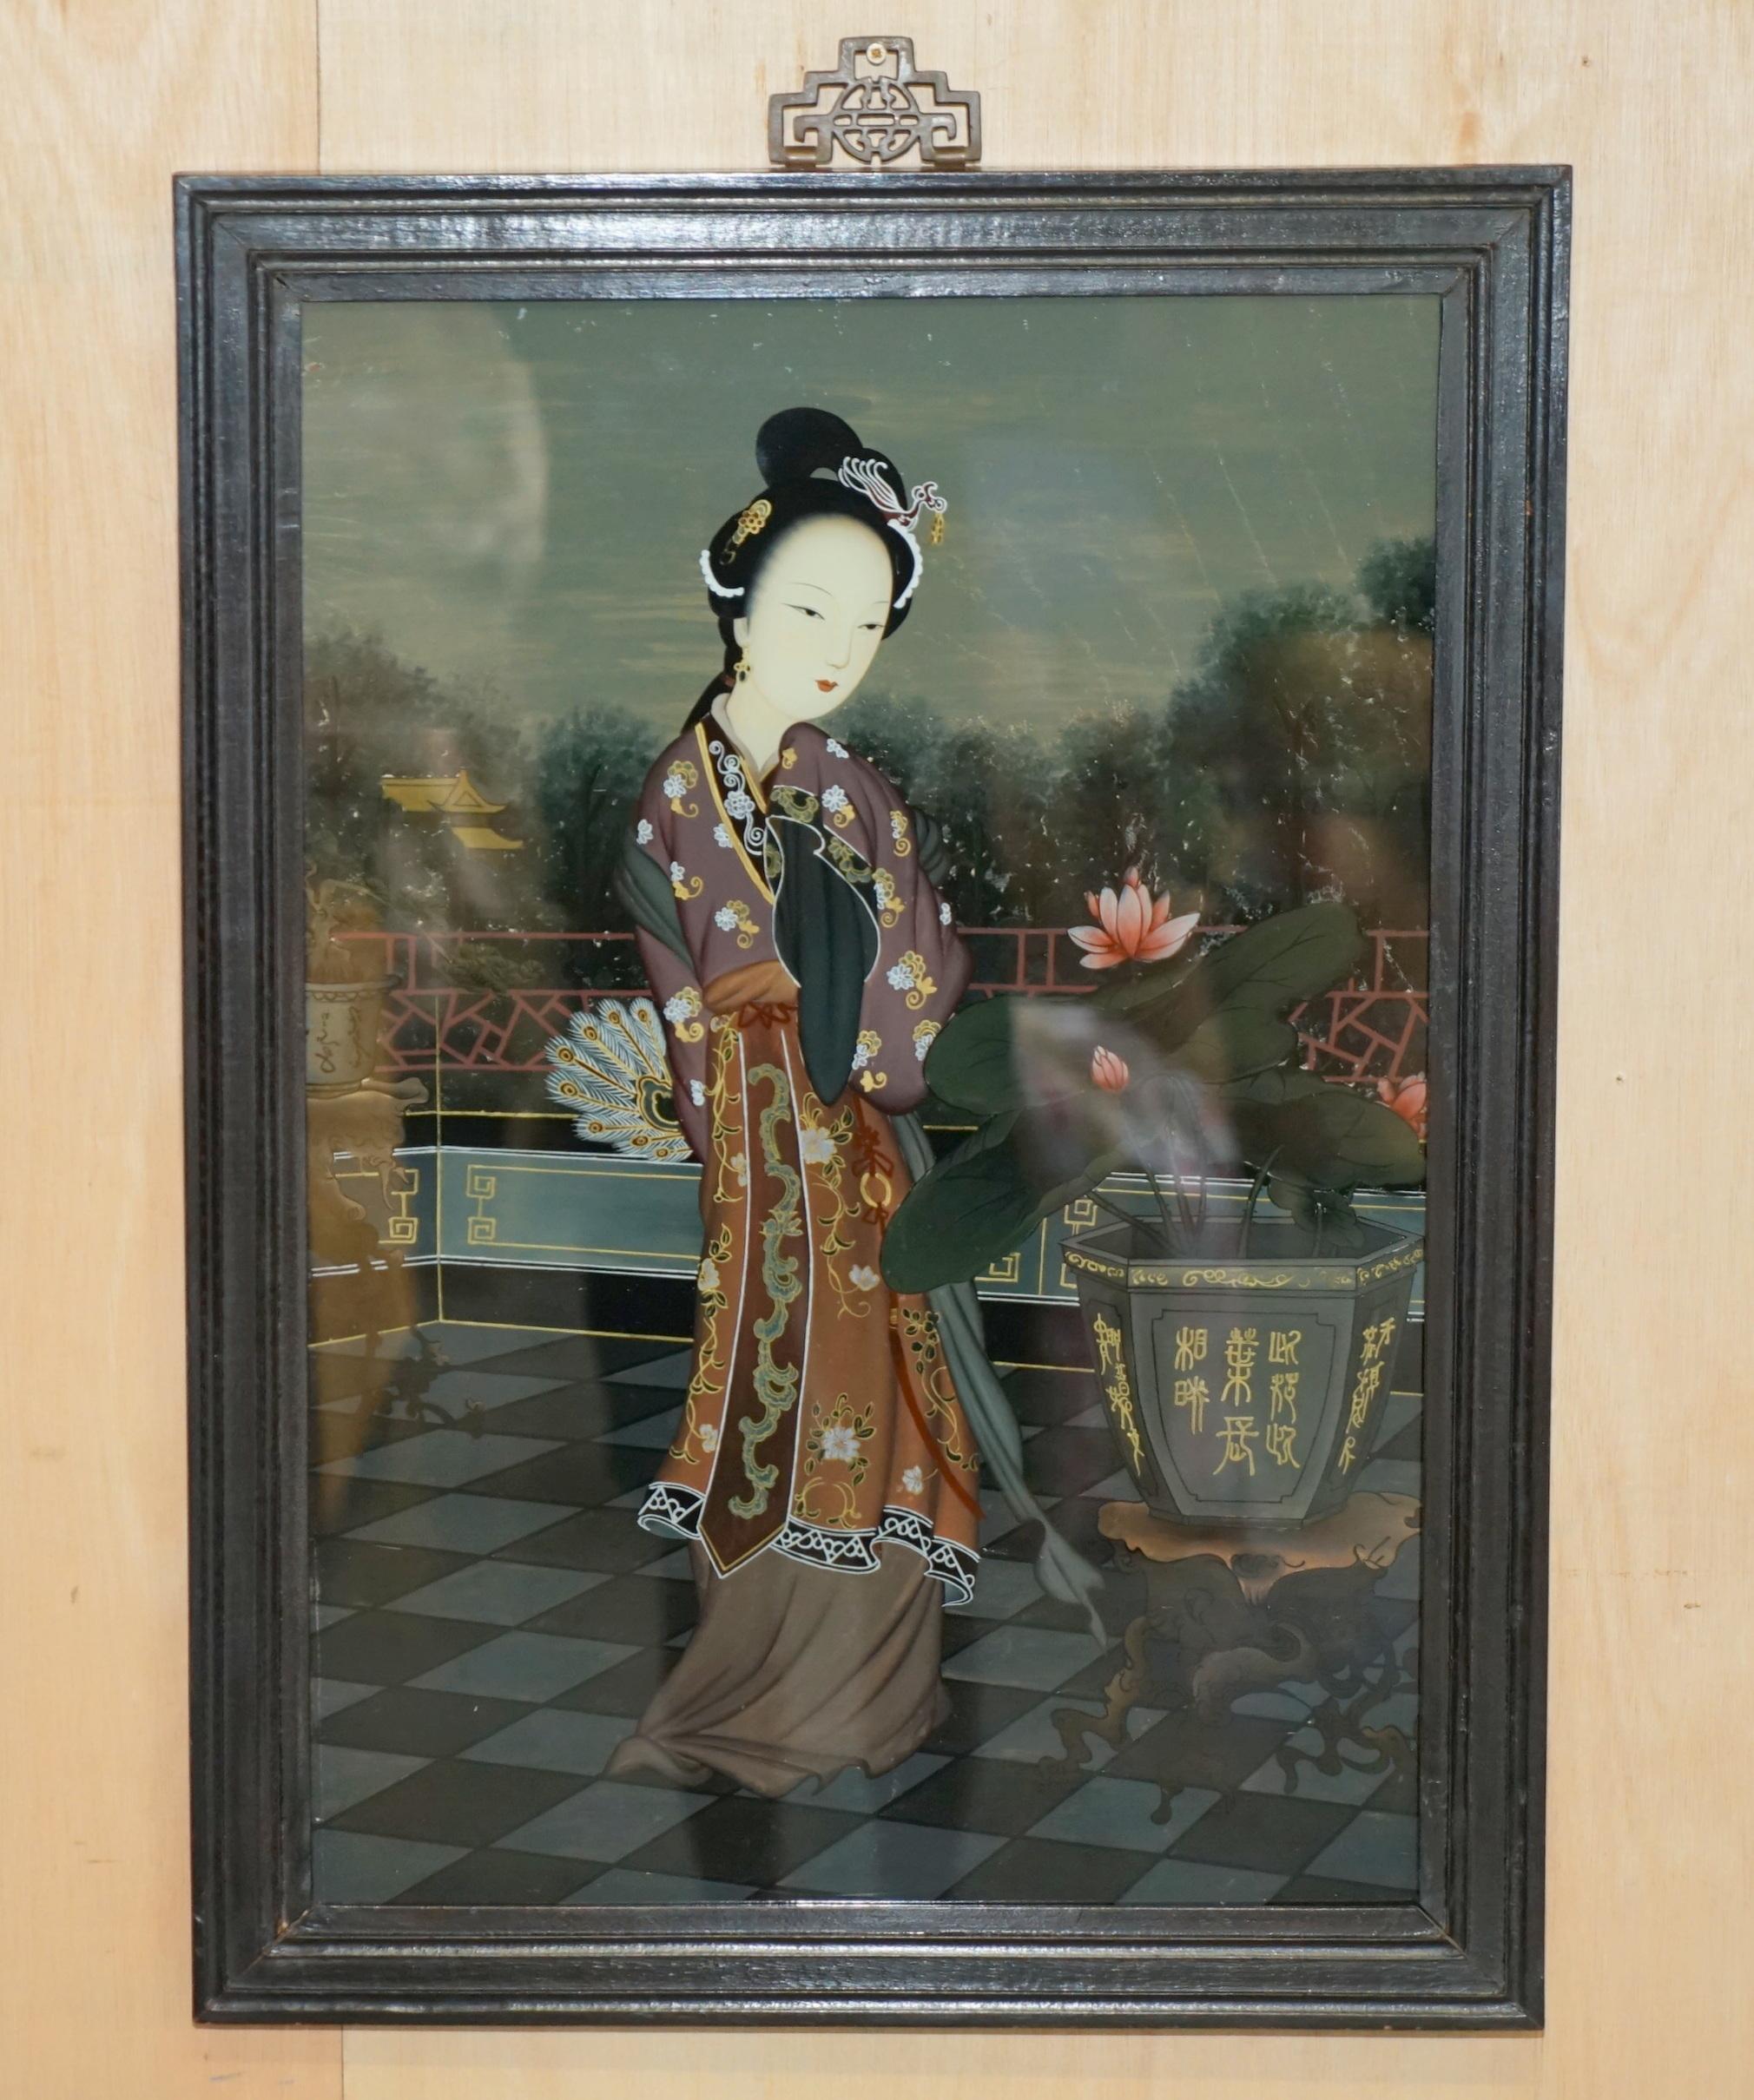 Royal House Antiques

Royal House Antiques is delighted to offer for sale this Sublime pair of Antique Chinese Ancestral Portraits which have been hand reverse painted on to the back of glass

Please note the delivery fee listed is just a guide, it